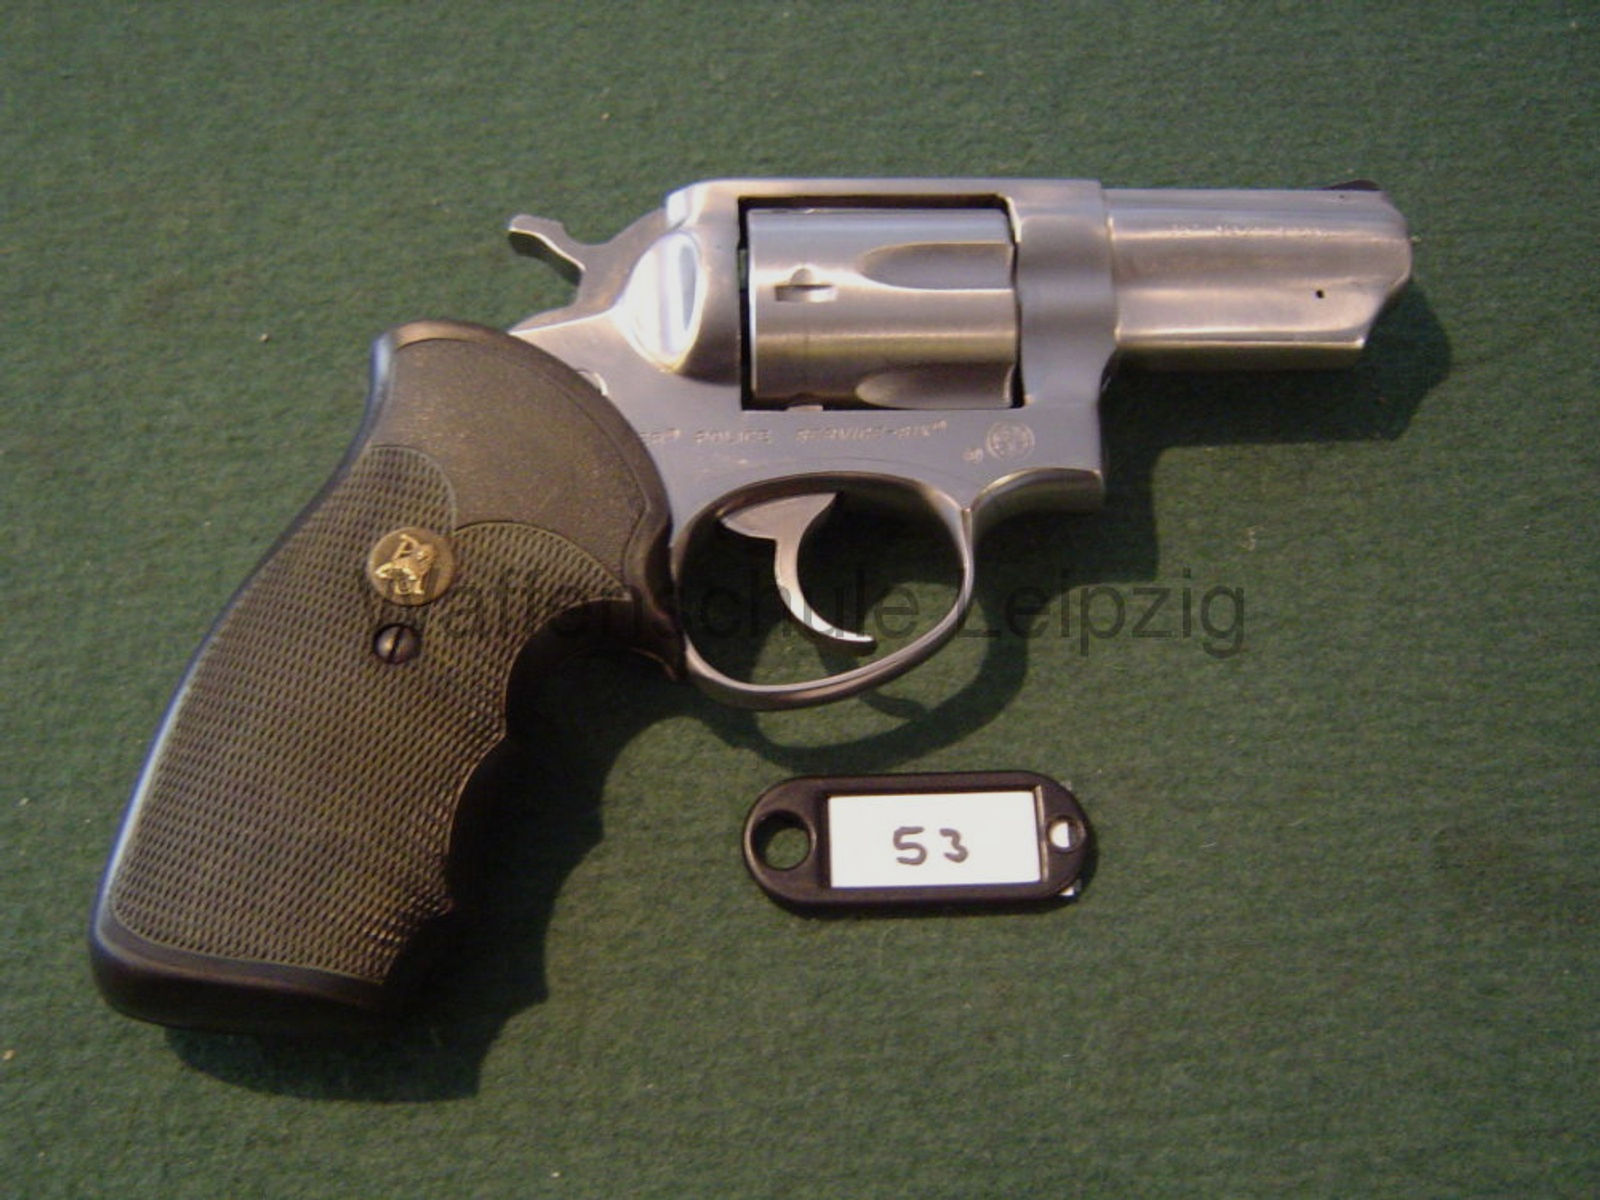 Ruger	 Police Service Six